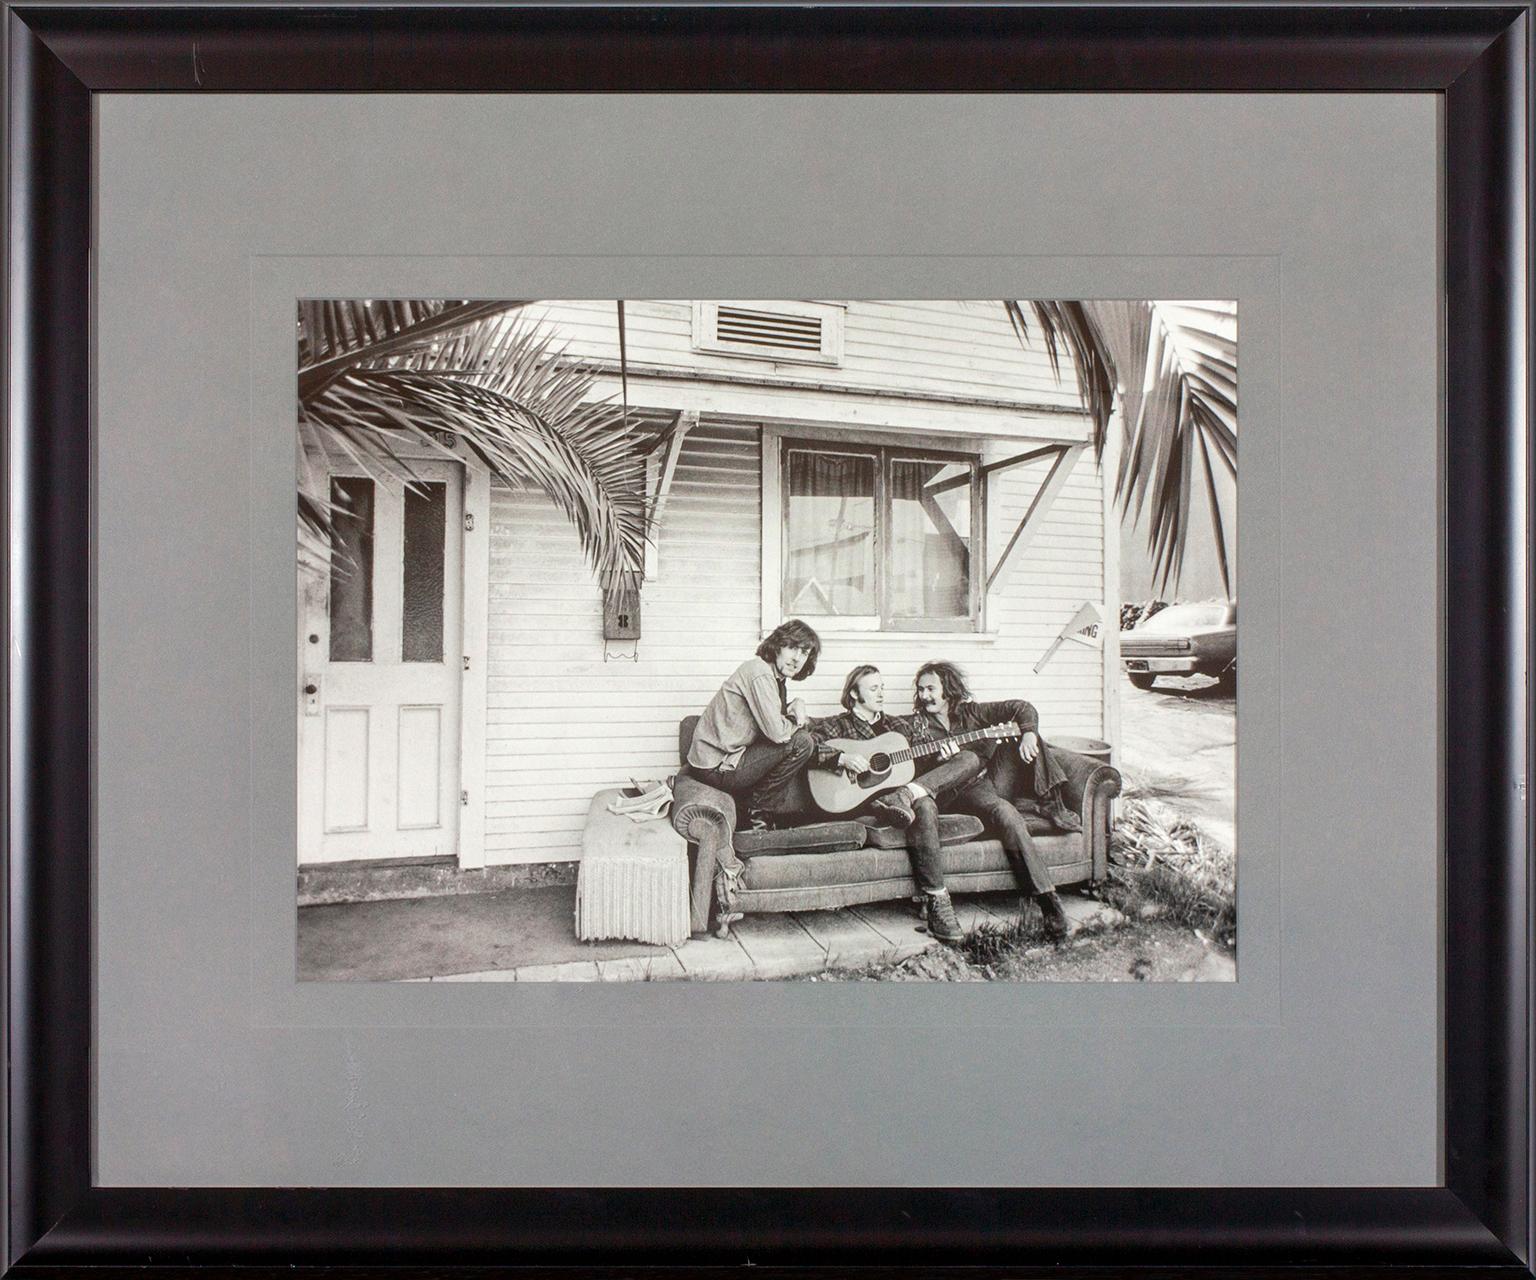 Outtake photo from 1969 Crosby, Stills & Nash album cover photo session in West Hollywood, California, by photographer Henry Diltz. Depicts David Crosby, Stephen Stills and Graham Nash sitting on a couch outside a house. This framed photo was